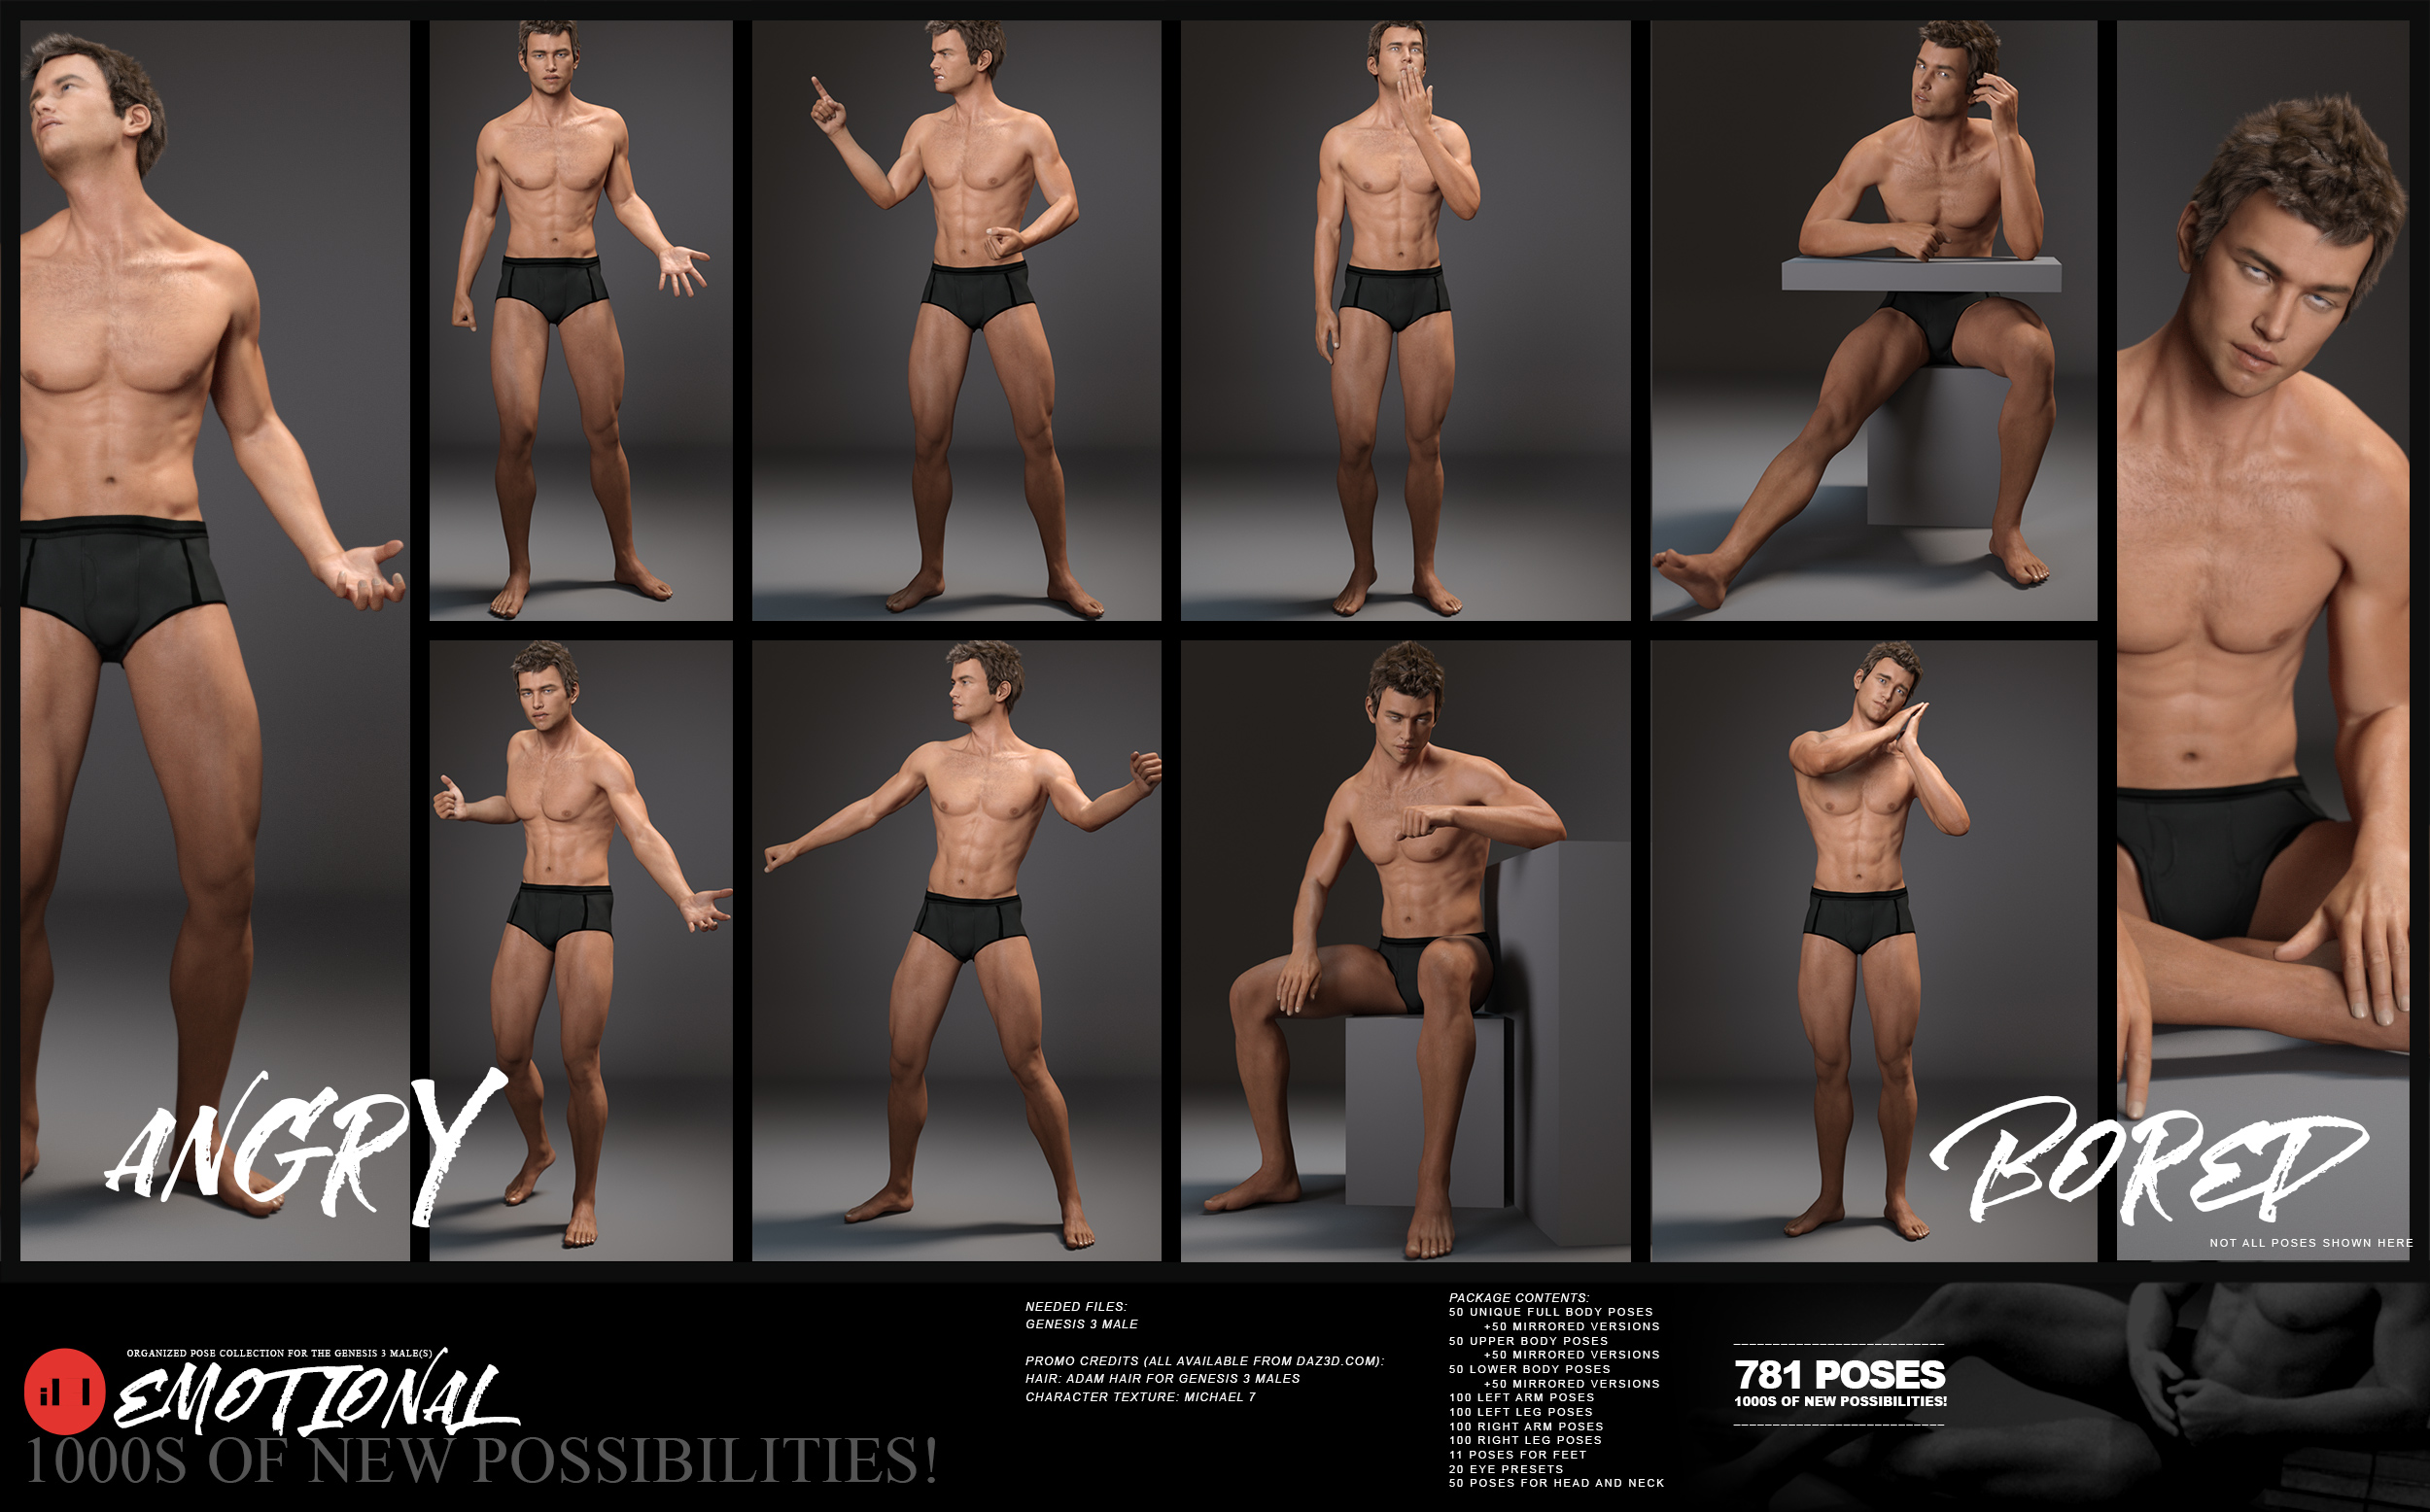 i13 Emotional Pose Collection for the Genesis 3 Male(s) by: ironman13, 3D Models by Daz 3D